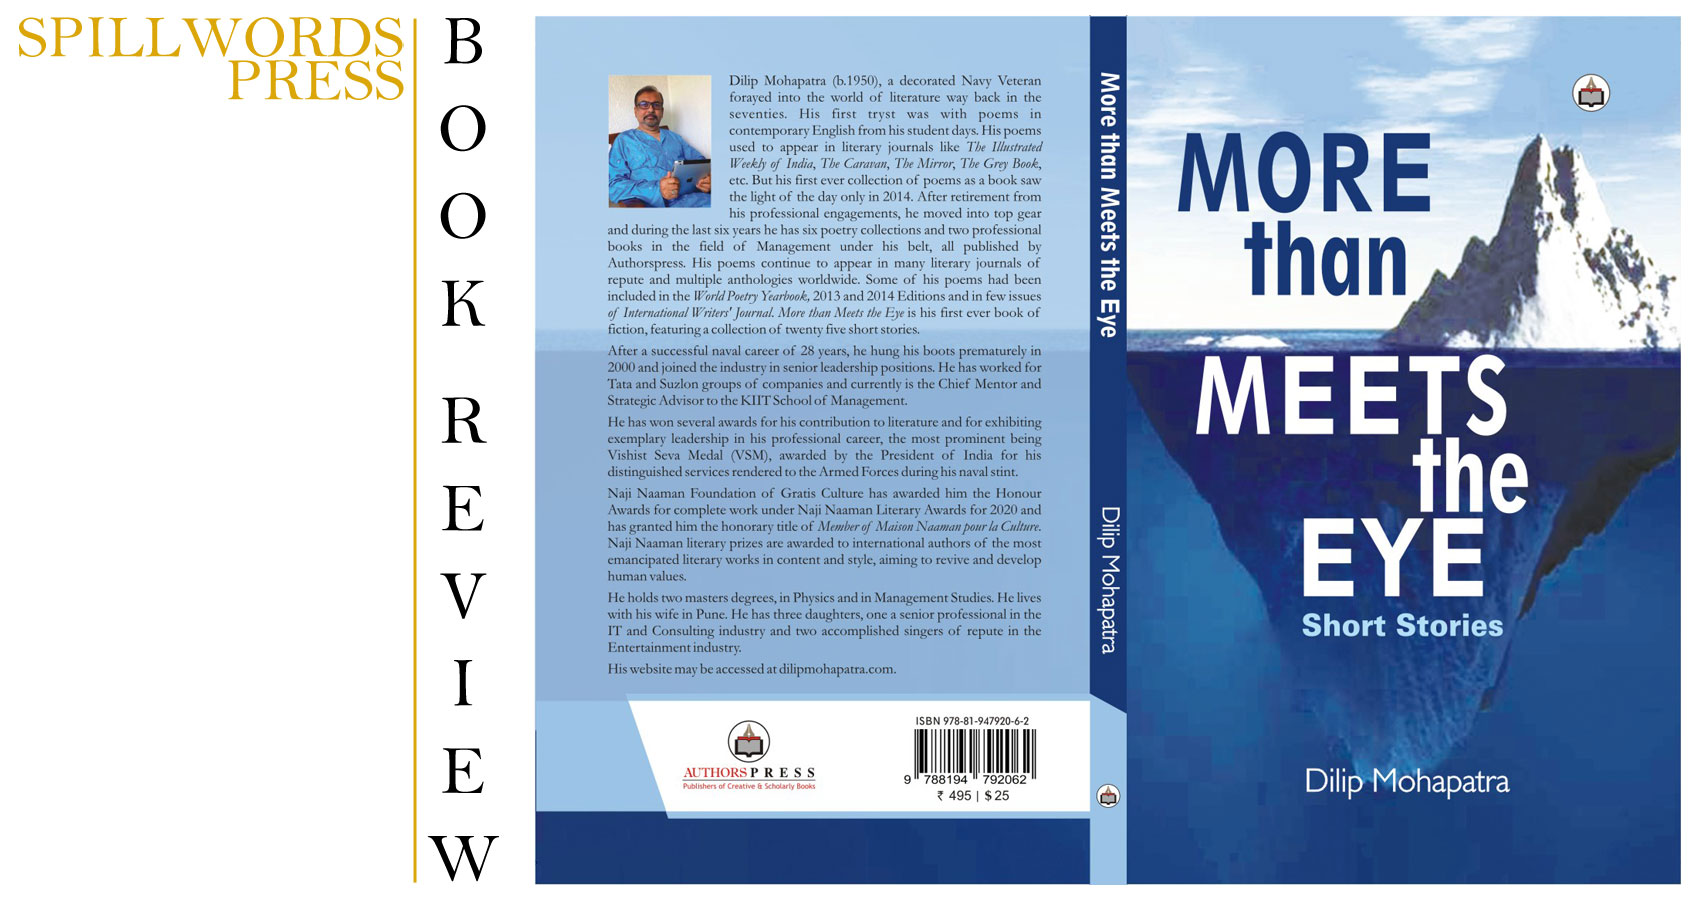 Book Review - 'More Than Meets the Eye', a book of short stories by Dilip Mohapatra at Spillwords.com